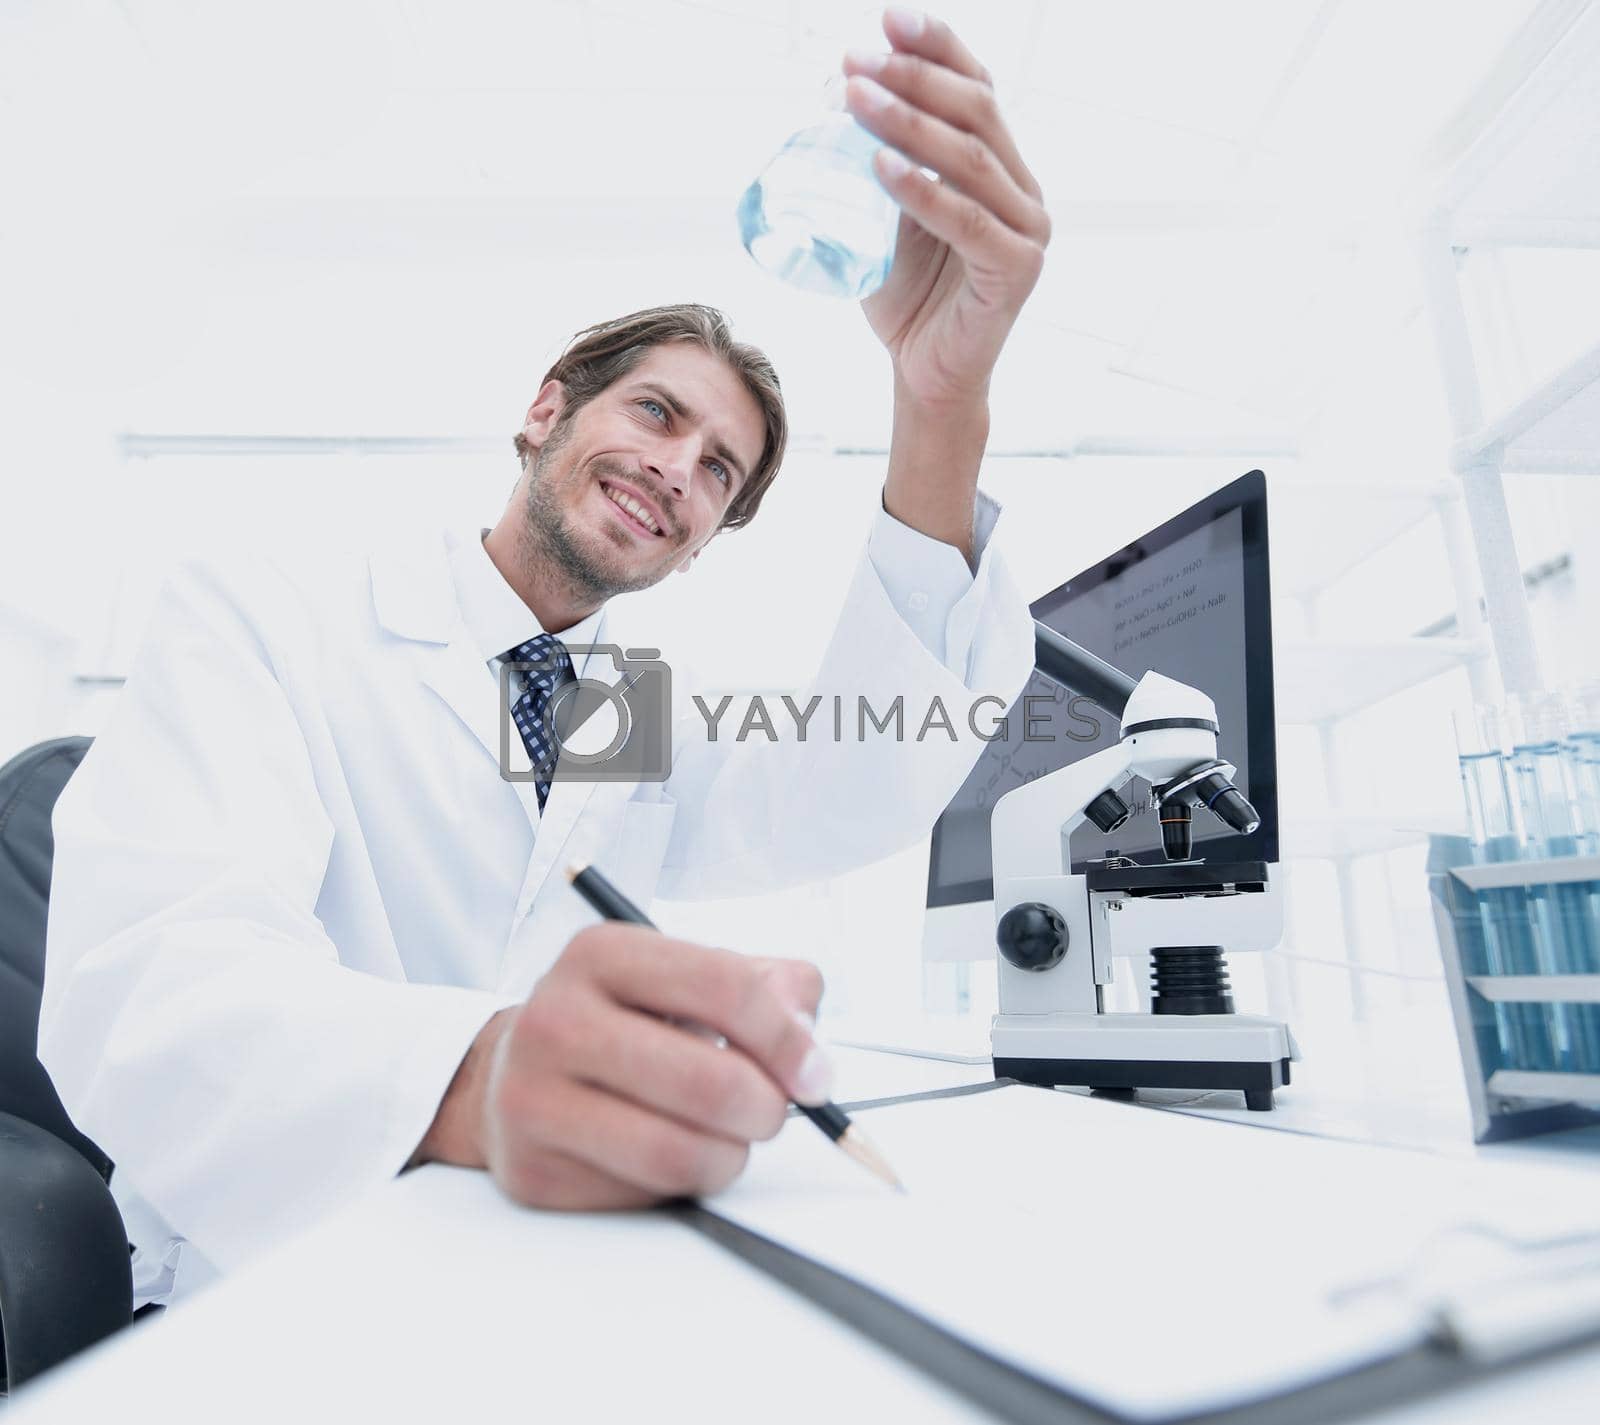 Royalty free image of scientist analyzing an experiment in a laboratory by asdf